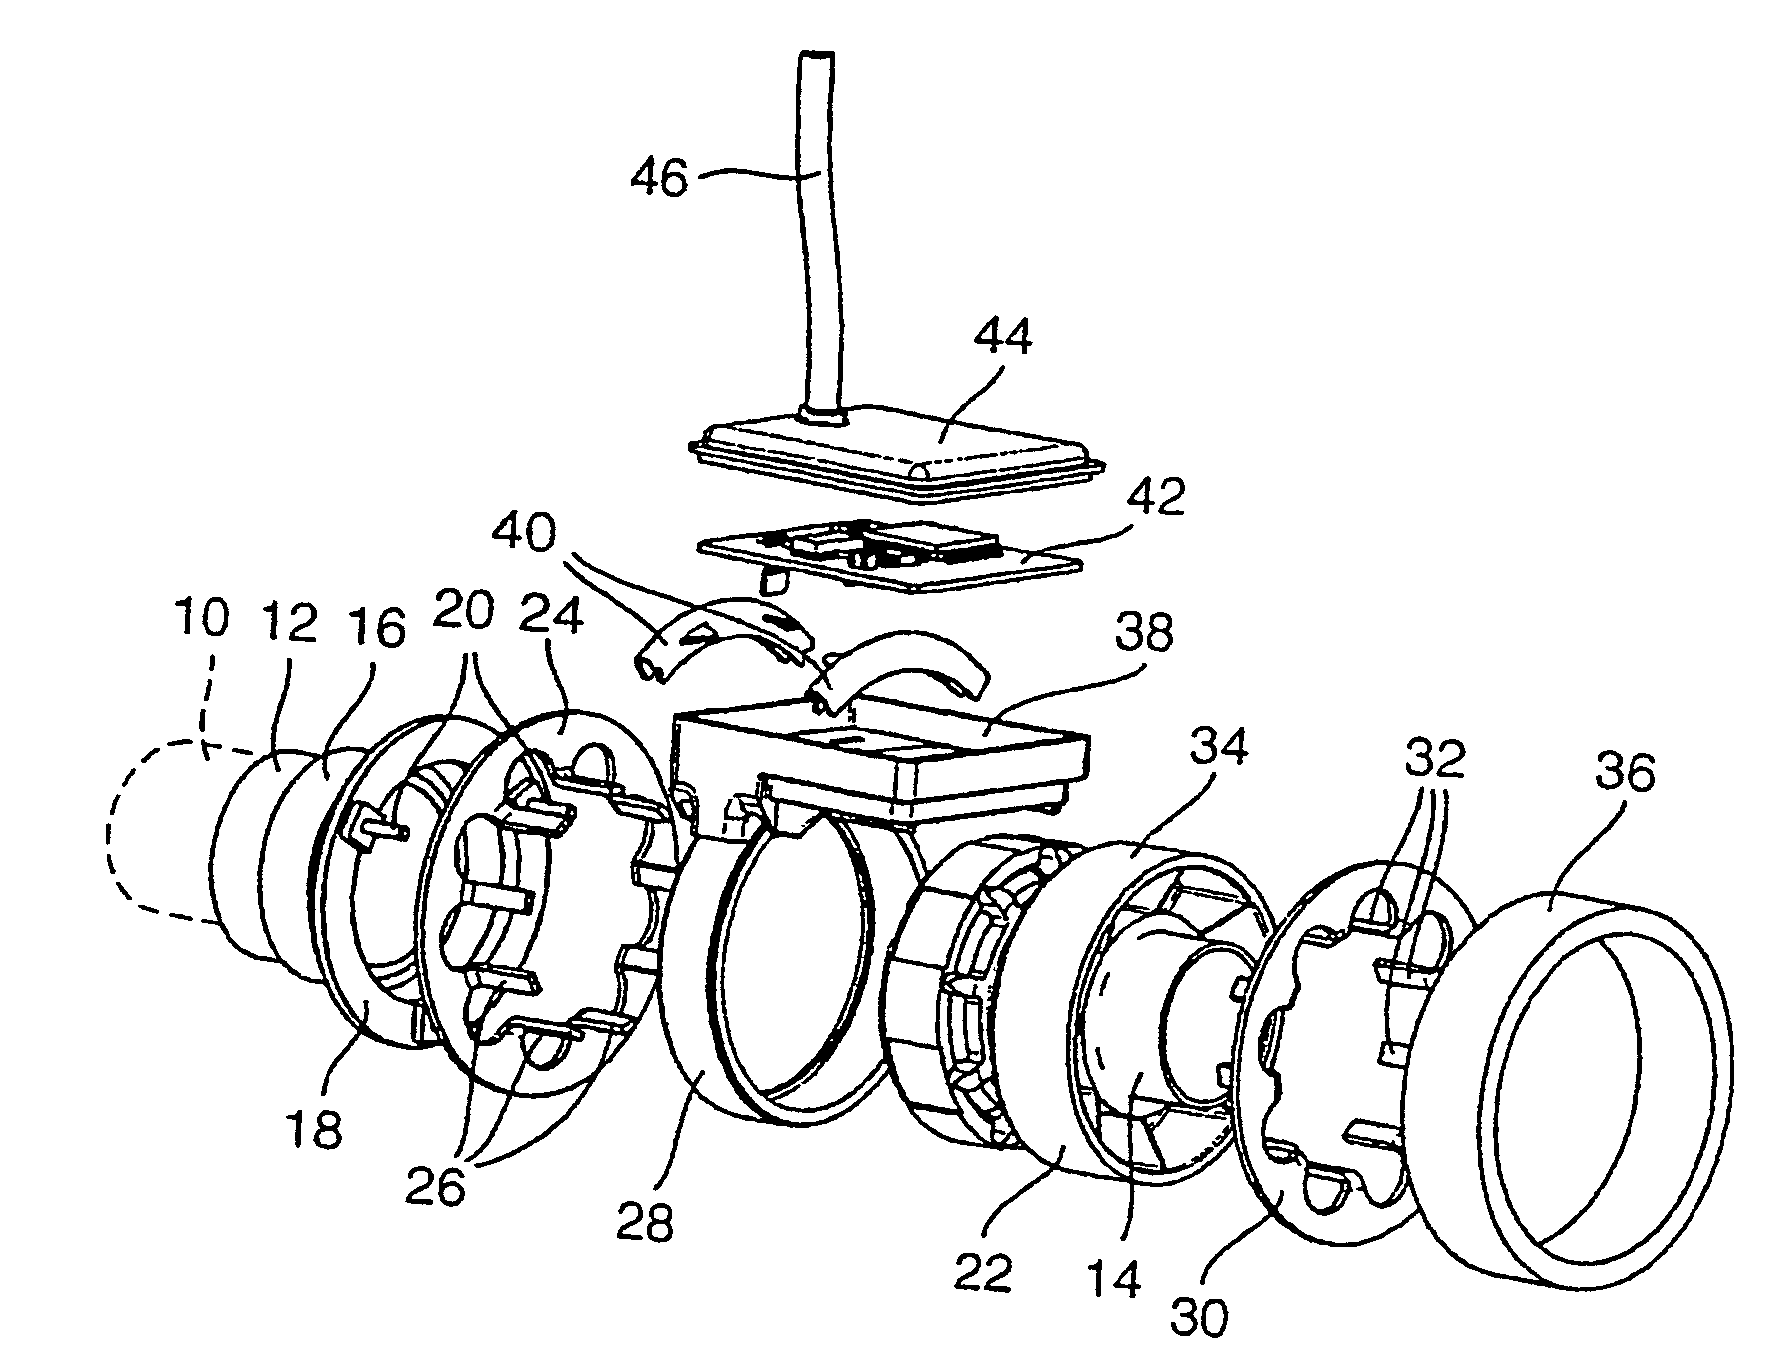 Device for determining a steering angle and a torque that is exerted on a steering shaft